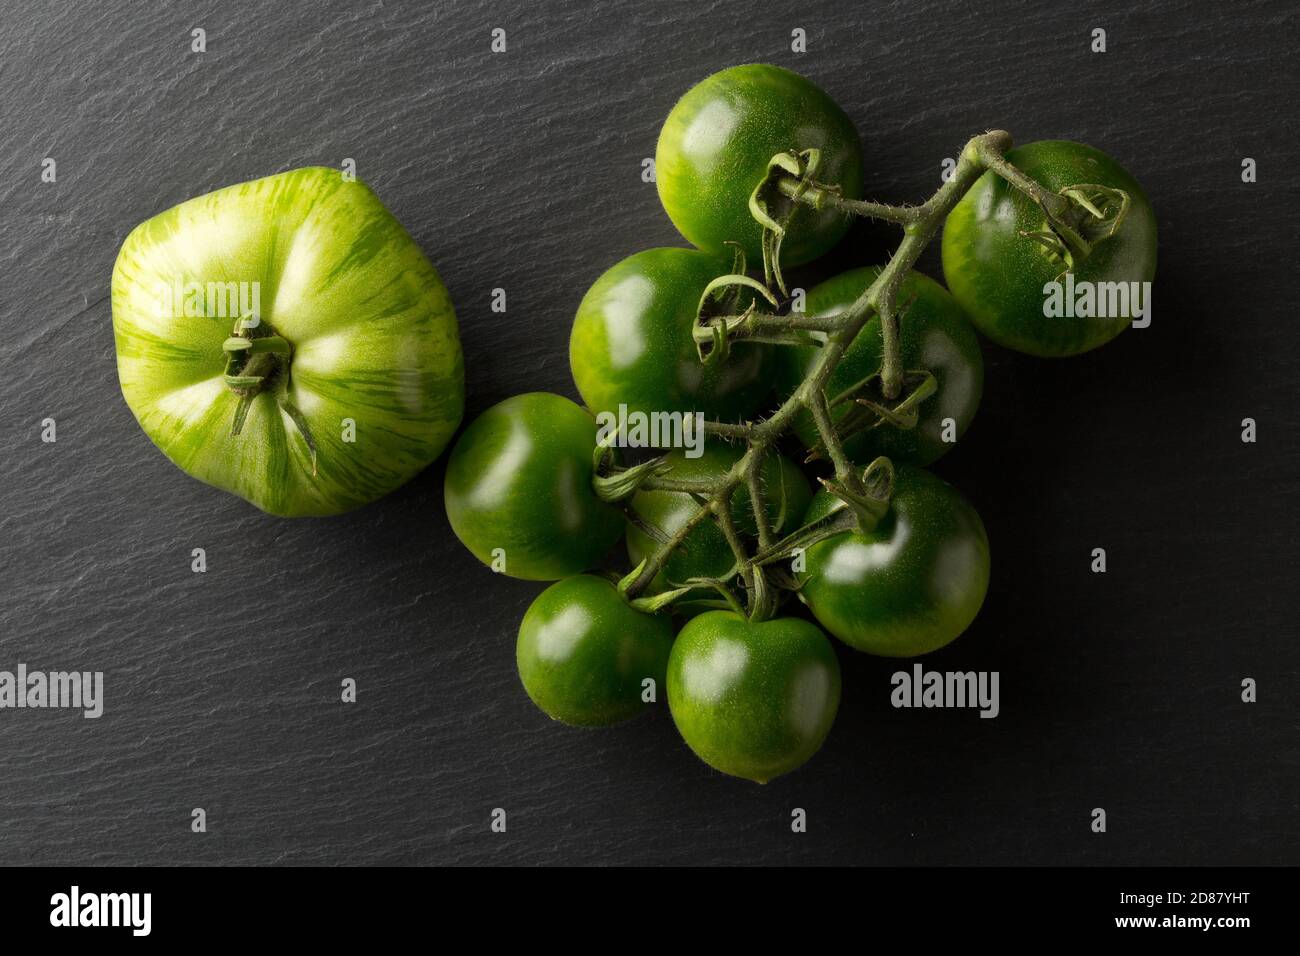 Unripe green tomatoes on dark stone plate background, unripe tomatoes can be fried or used for relish, selective focus, flat lay top view from above Stock Photo